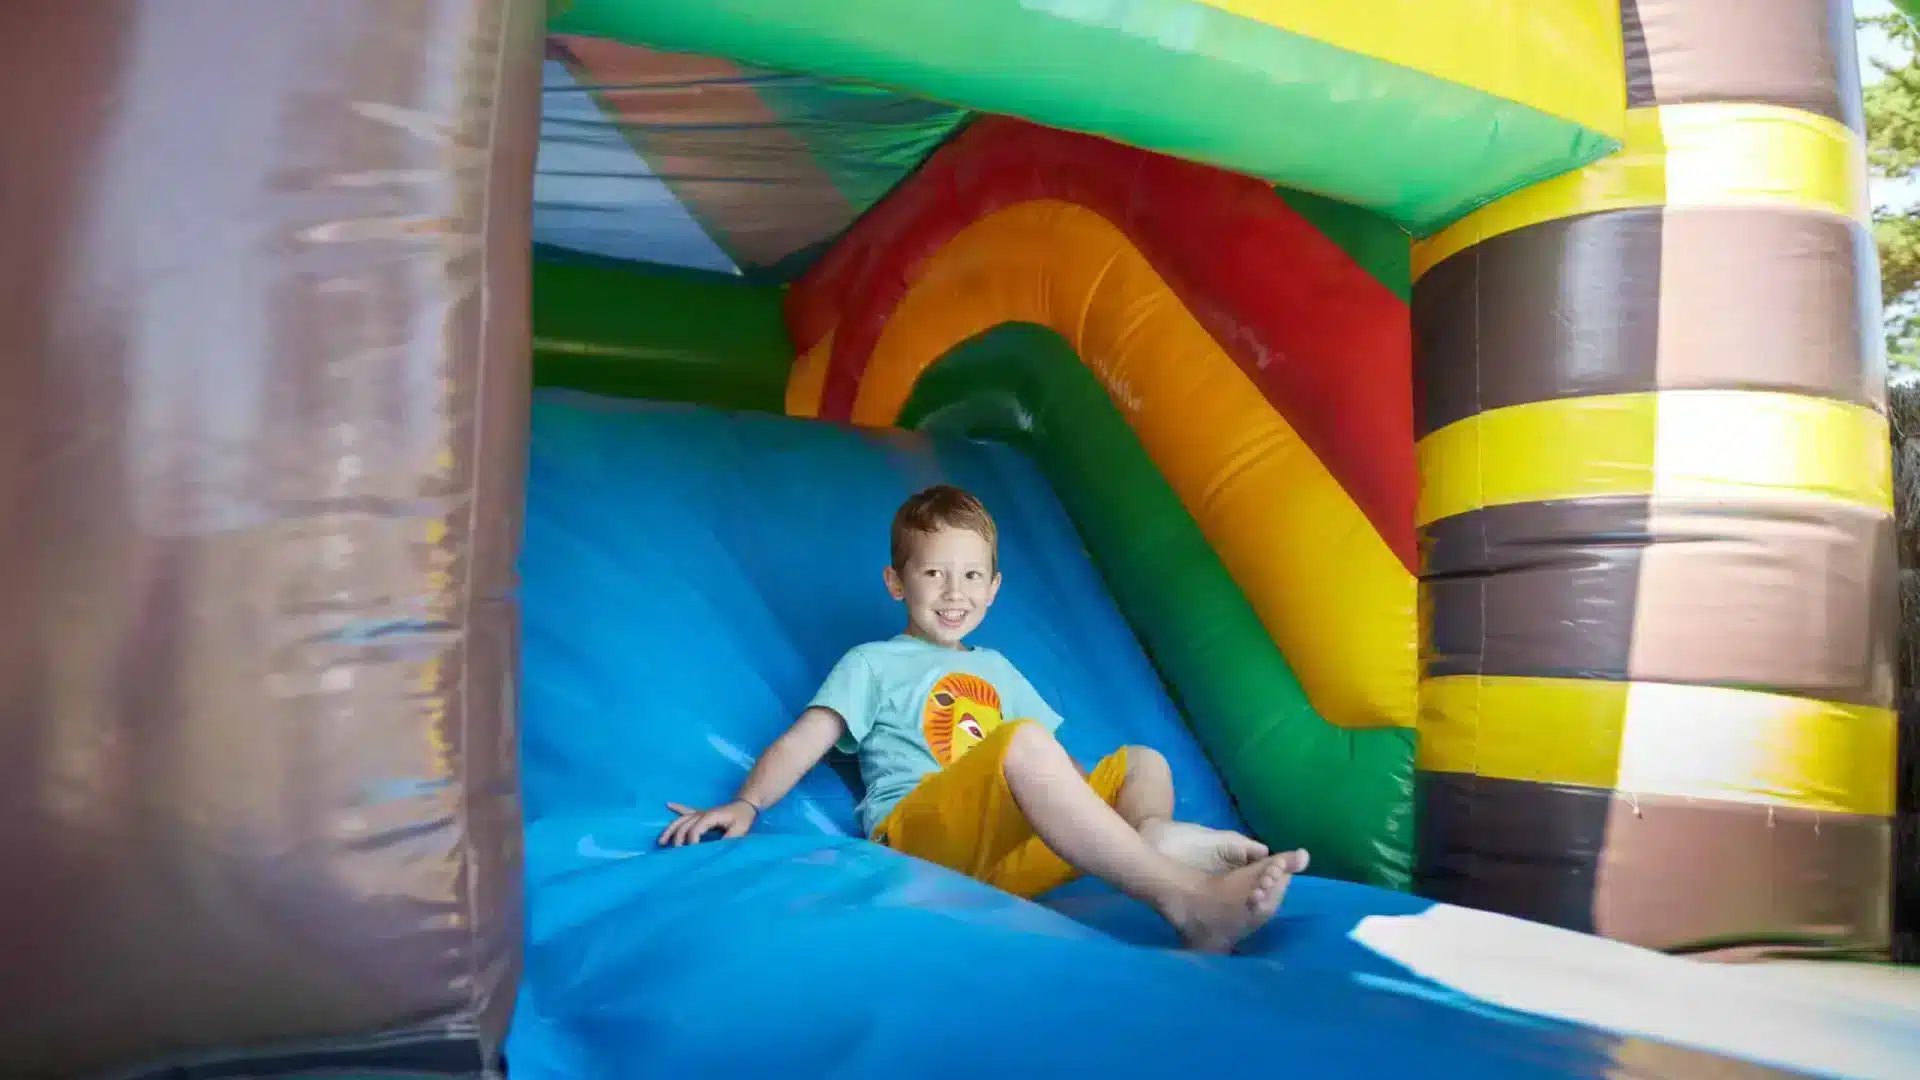 Slide on the campsite's inflatable structure